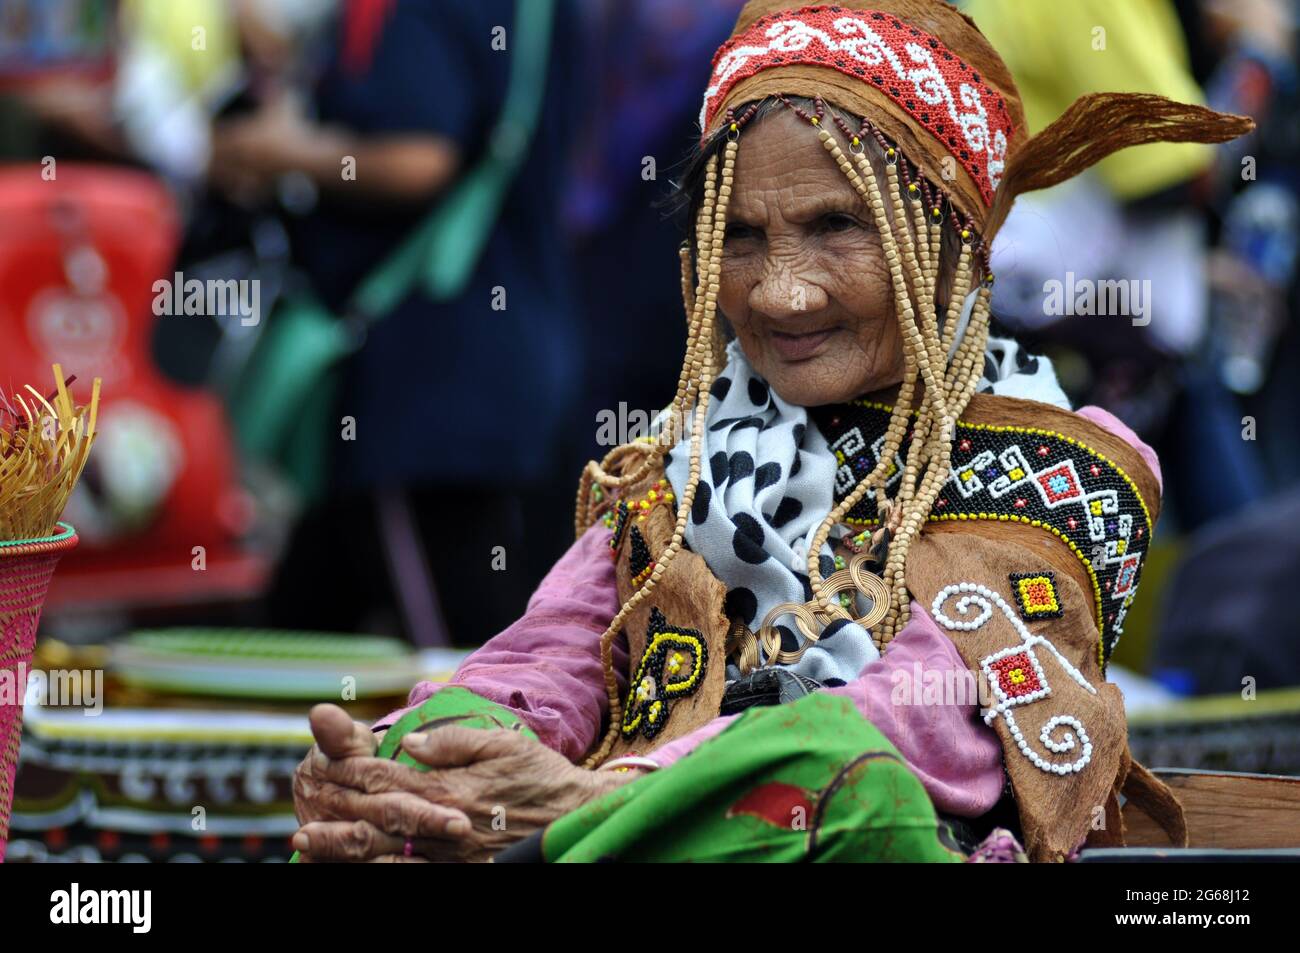 Jakarta, Indonesia - July 1, 2018: Indung Sabik, she is 128 years old from Dayak Meratus tribe was present at the Dayak Festival in Jakarta Stock Photo